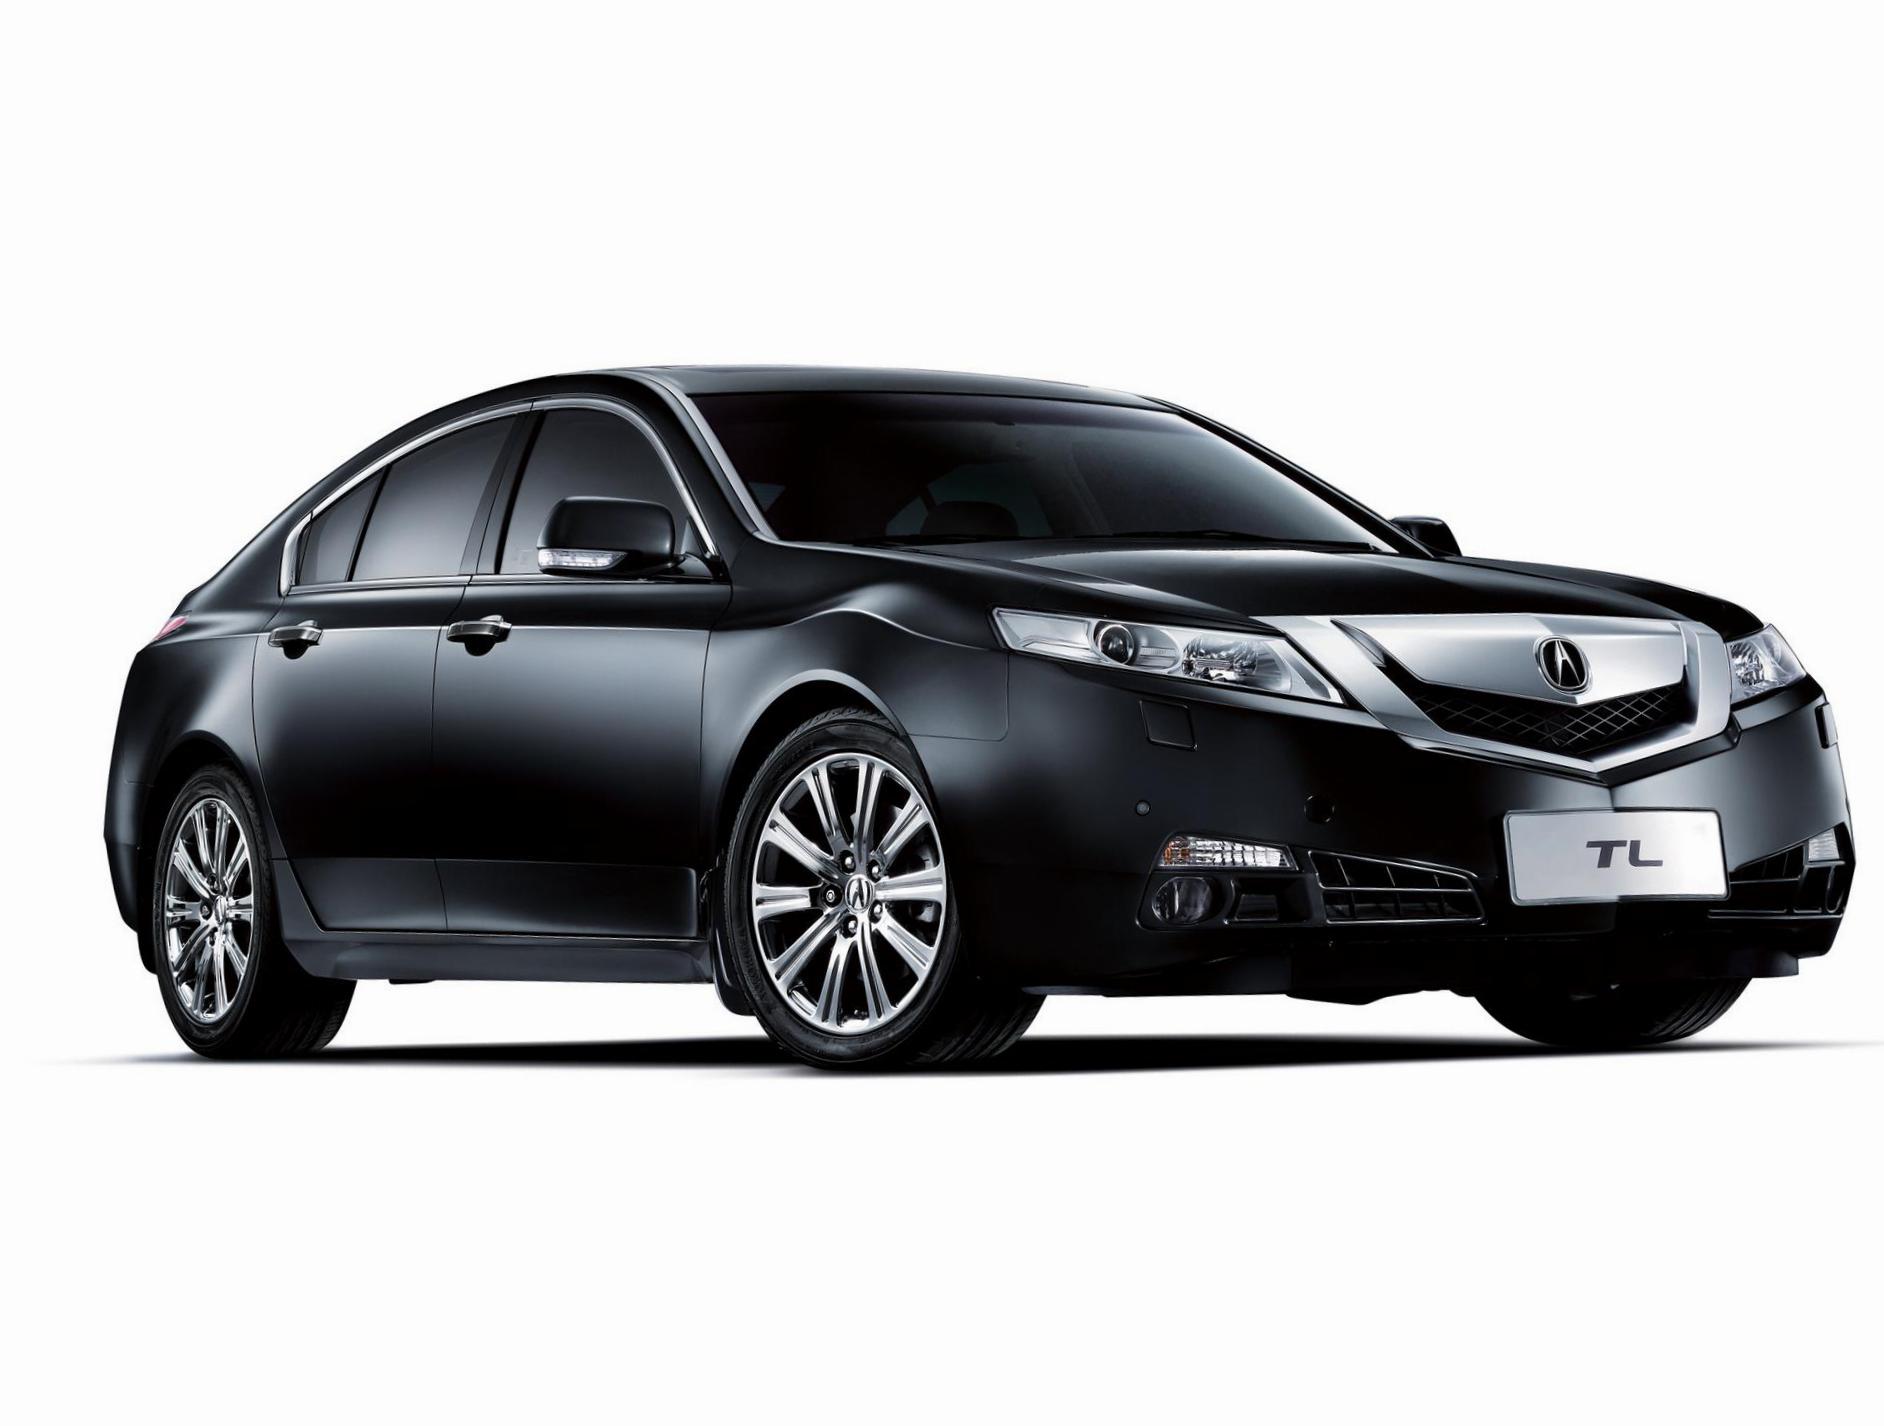 TL Acura approved 2015